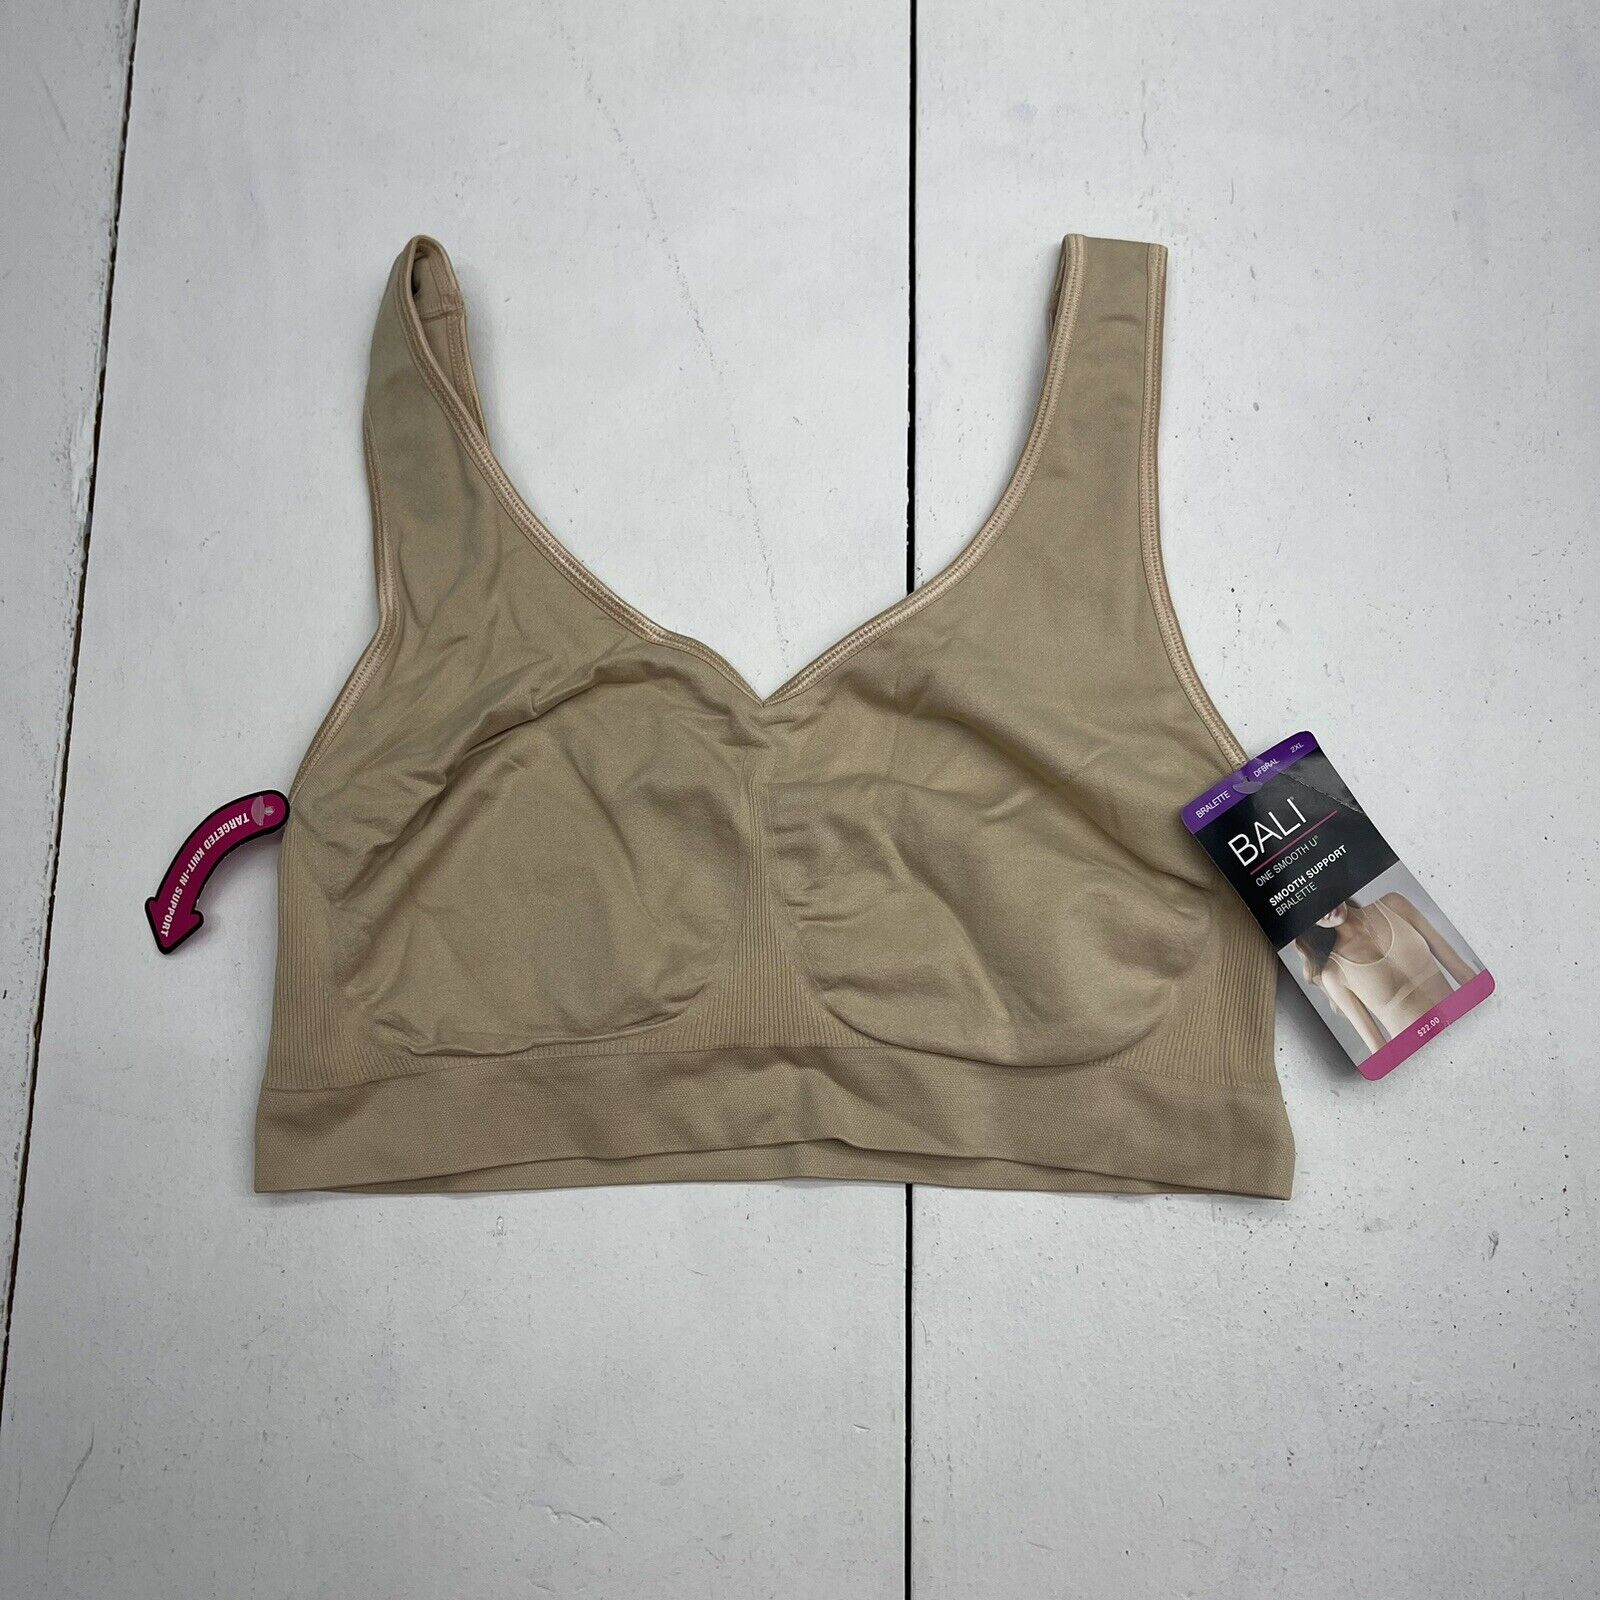 Bali Shapes & Support Wirefree Beige Bra Size Small - beyond exchange